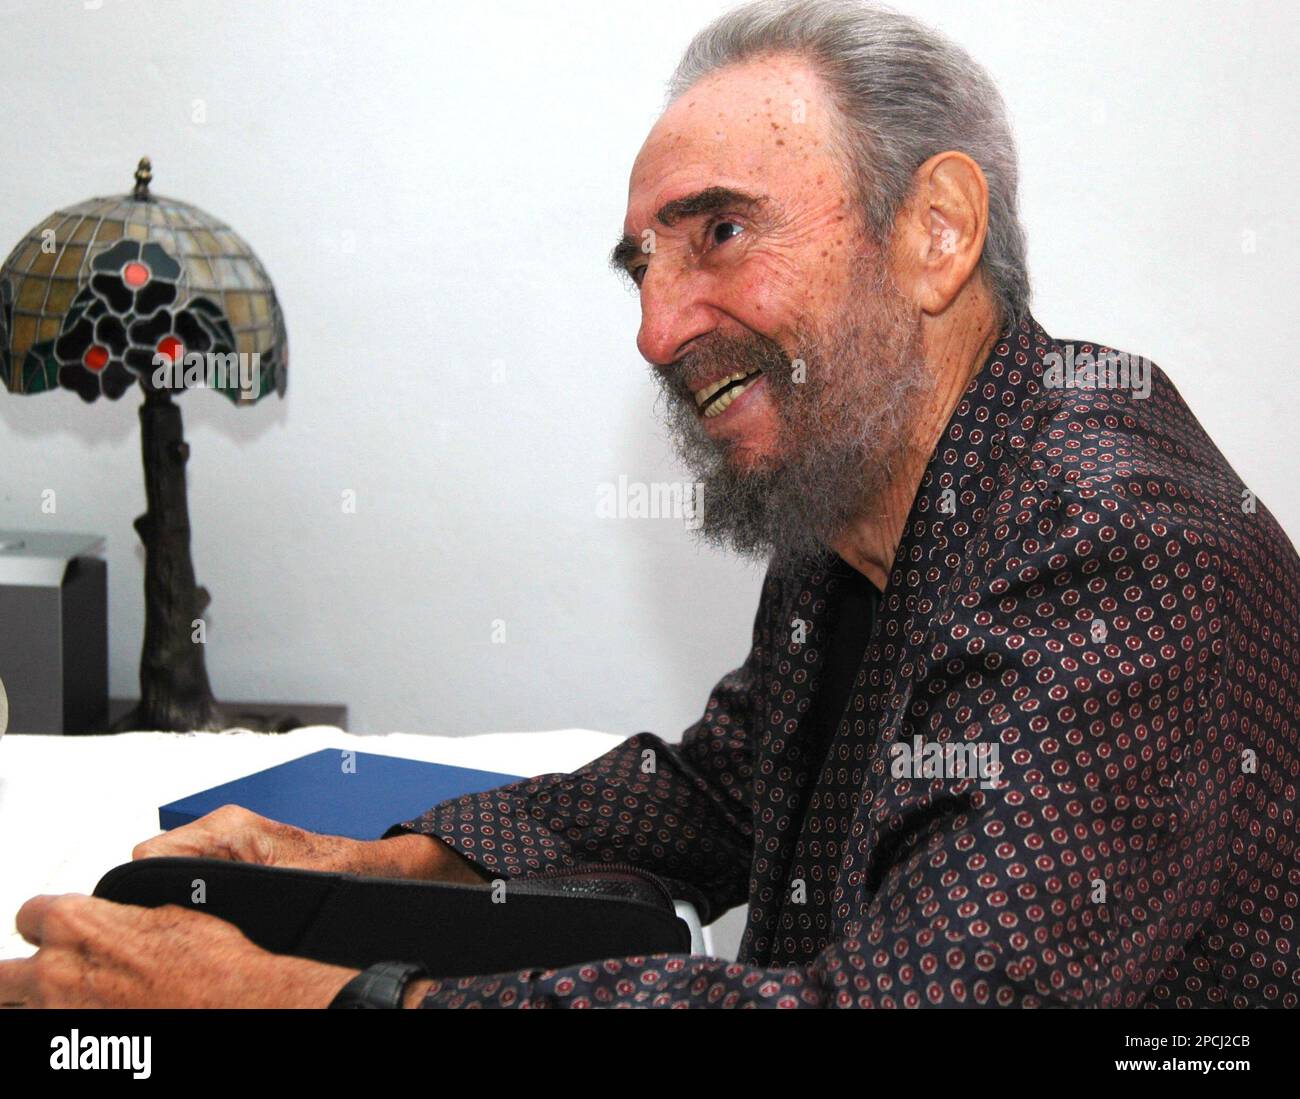 Cuba's leader Fidel Castro is seen during a meeting with Argentine Congressman Miguel Bonasso in Havana, Wednesday, Sept. 13, 2006. Castro made an appearance of sorts Wednesday on the sidelines of the Nonaligned Movement summit when Cuban state television showed photos of him wearing pajamas and chatting with a close friend from Argentina. (AP Photo/NOAL Summit, Pool) Stock Photo